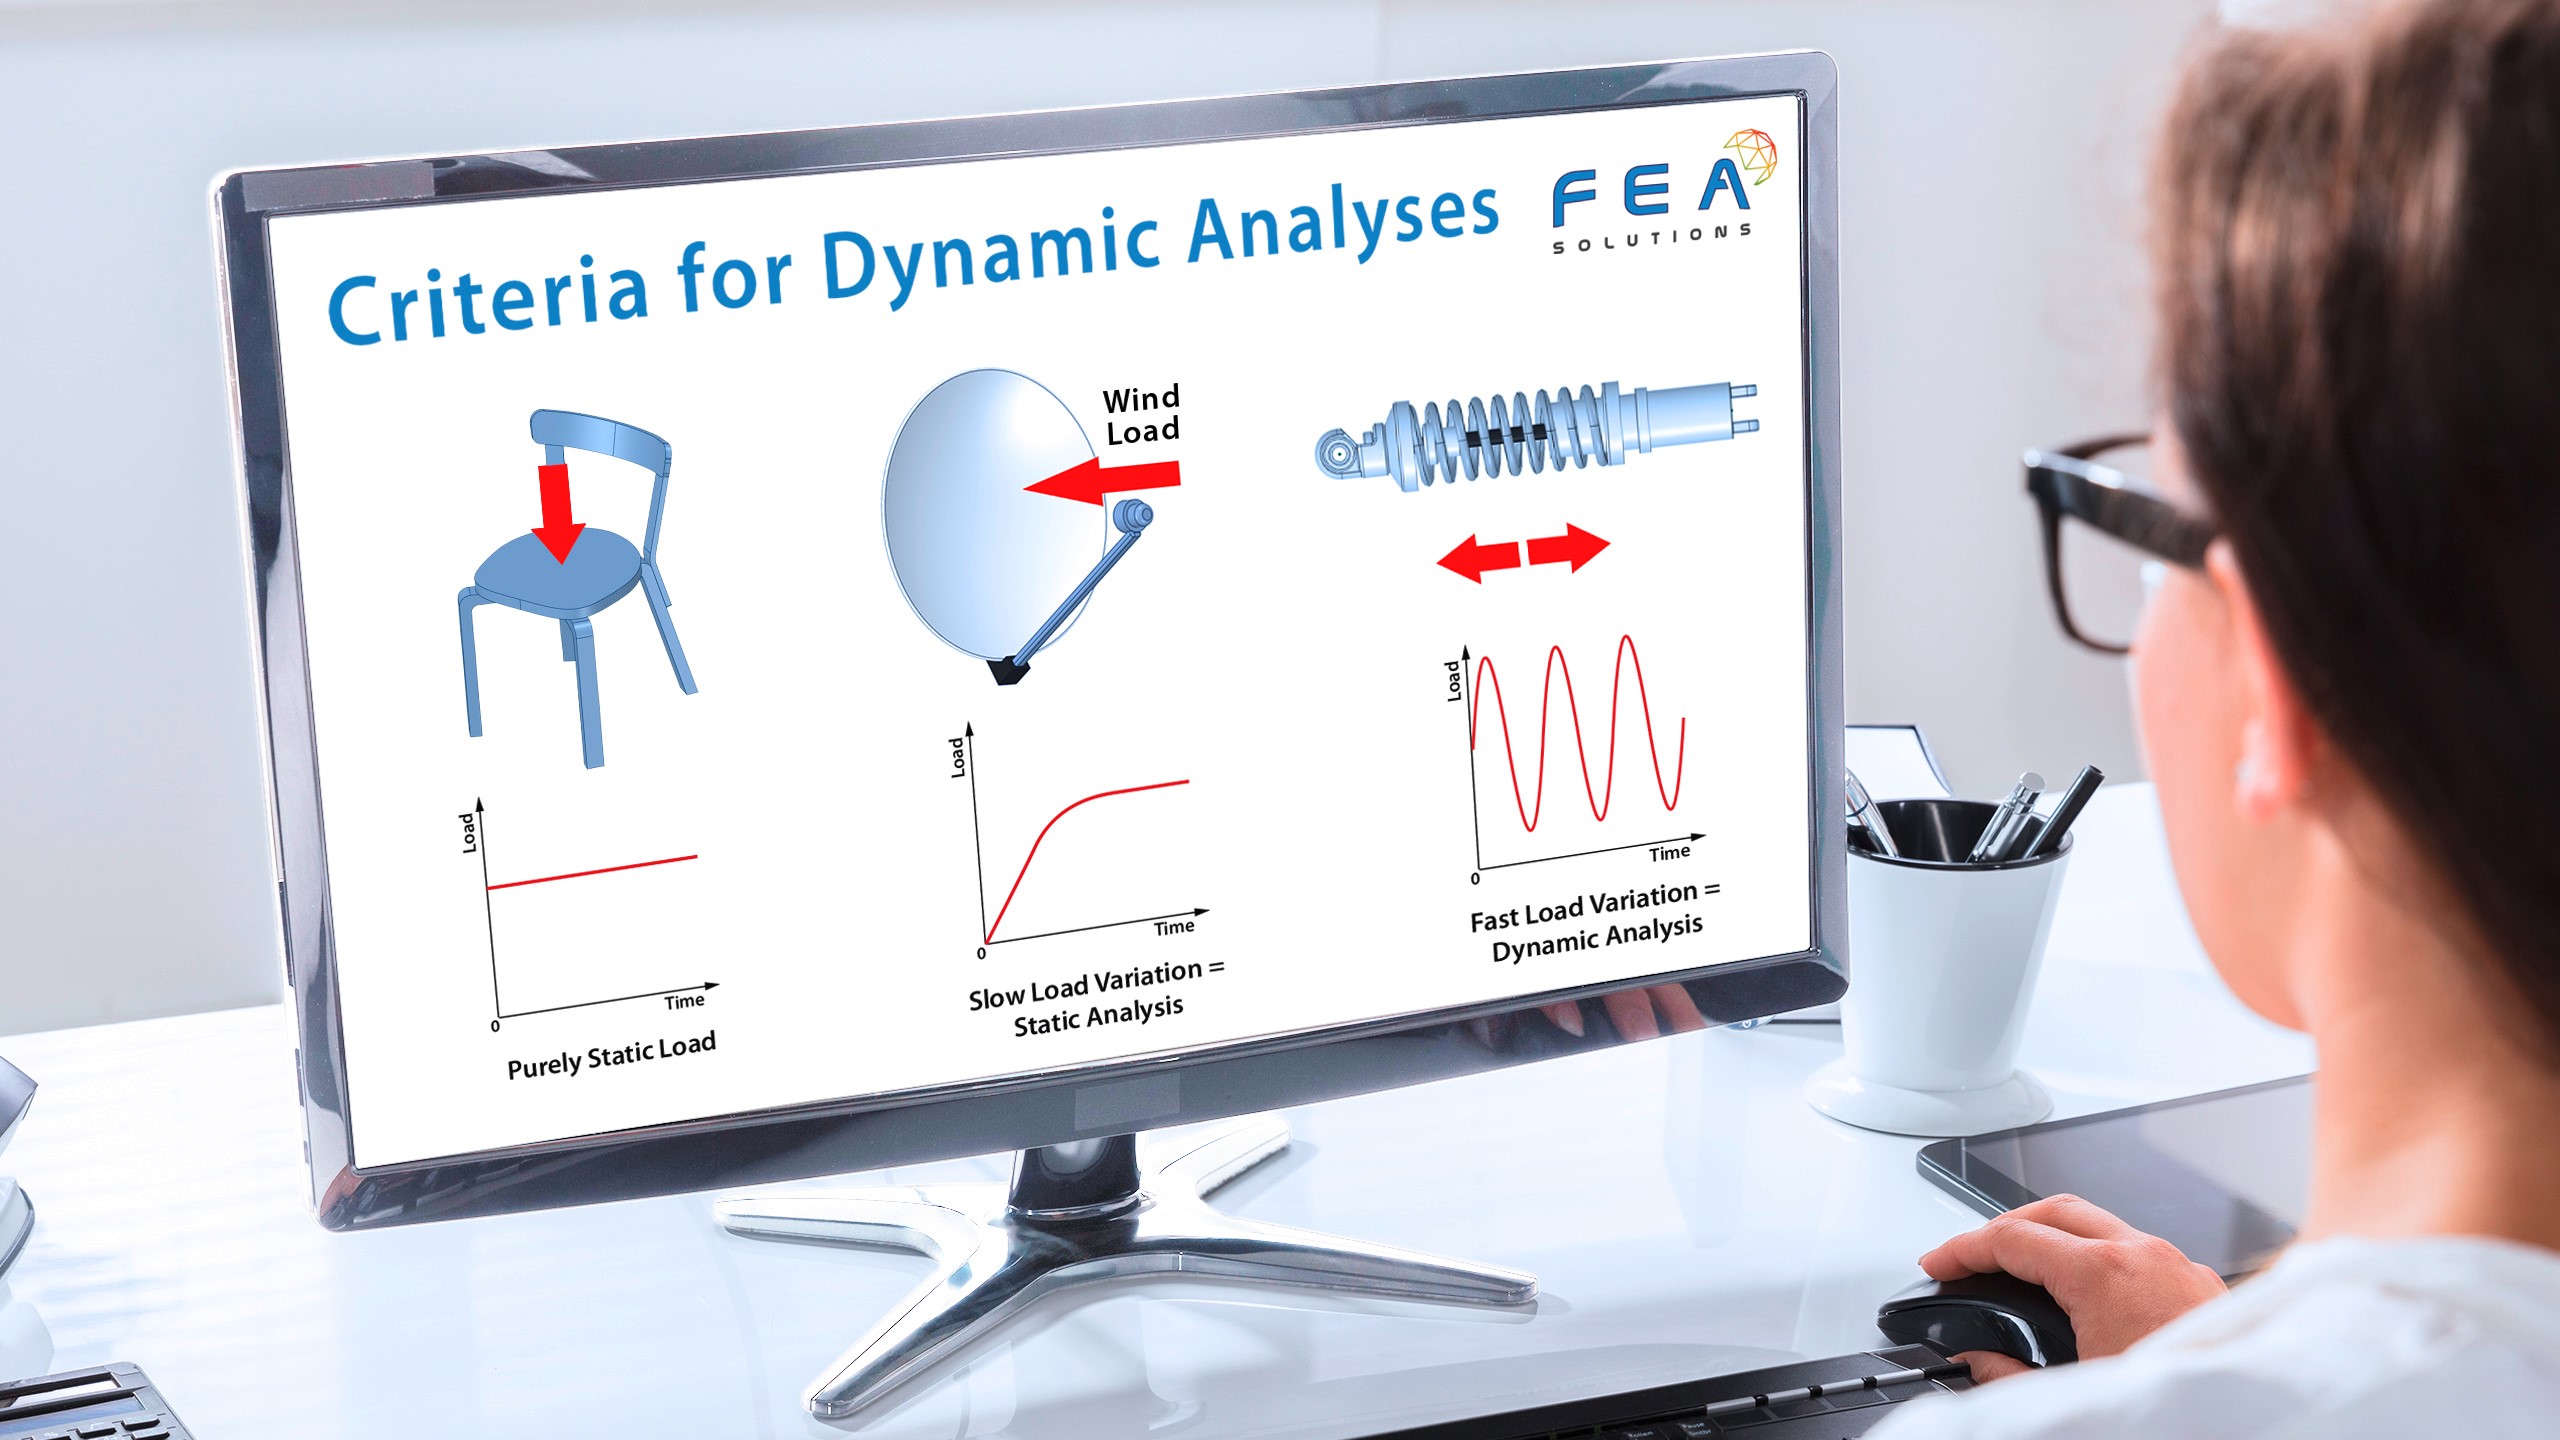 criteria for dynamic analyses infographic